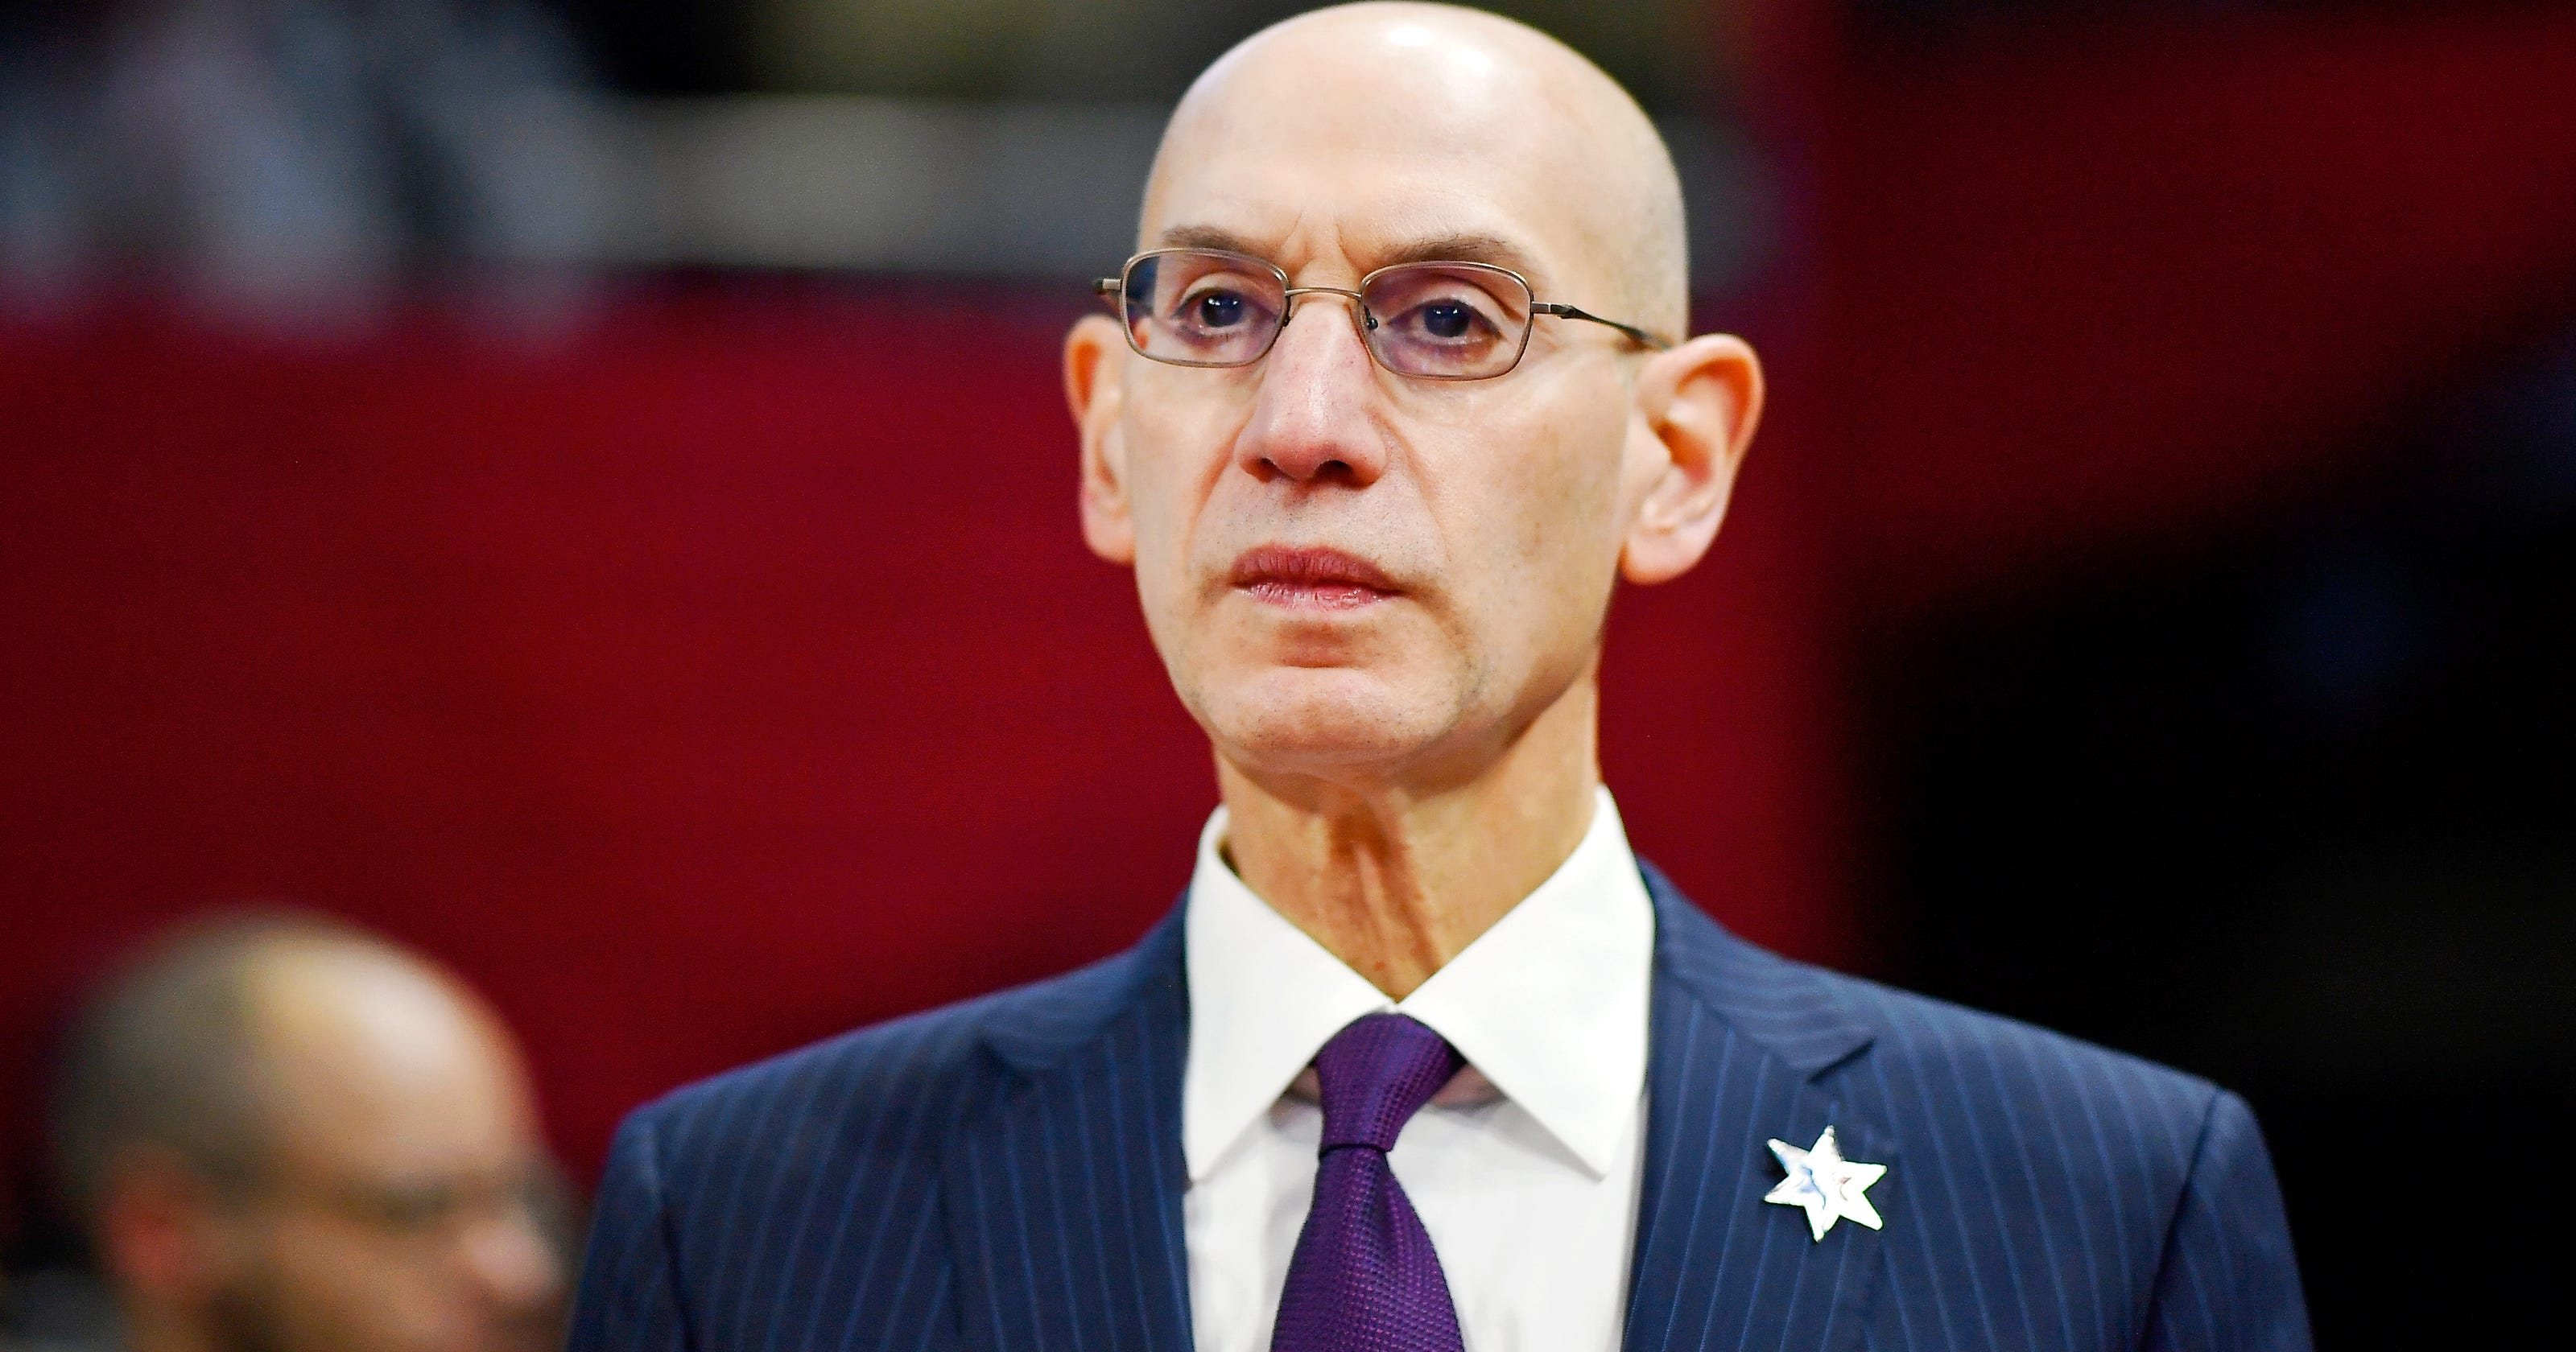 When will NBA decide on resuming season? Adam Silver says not ...